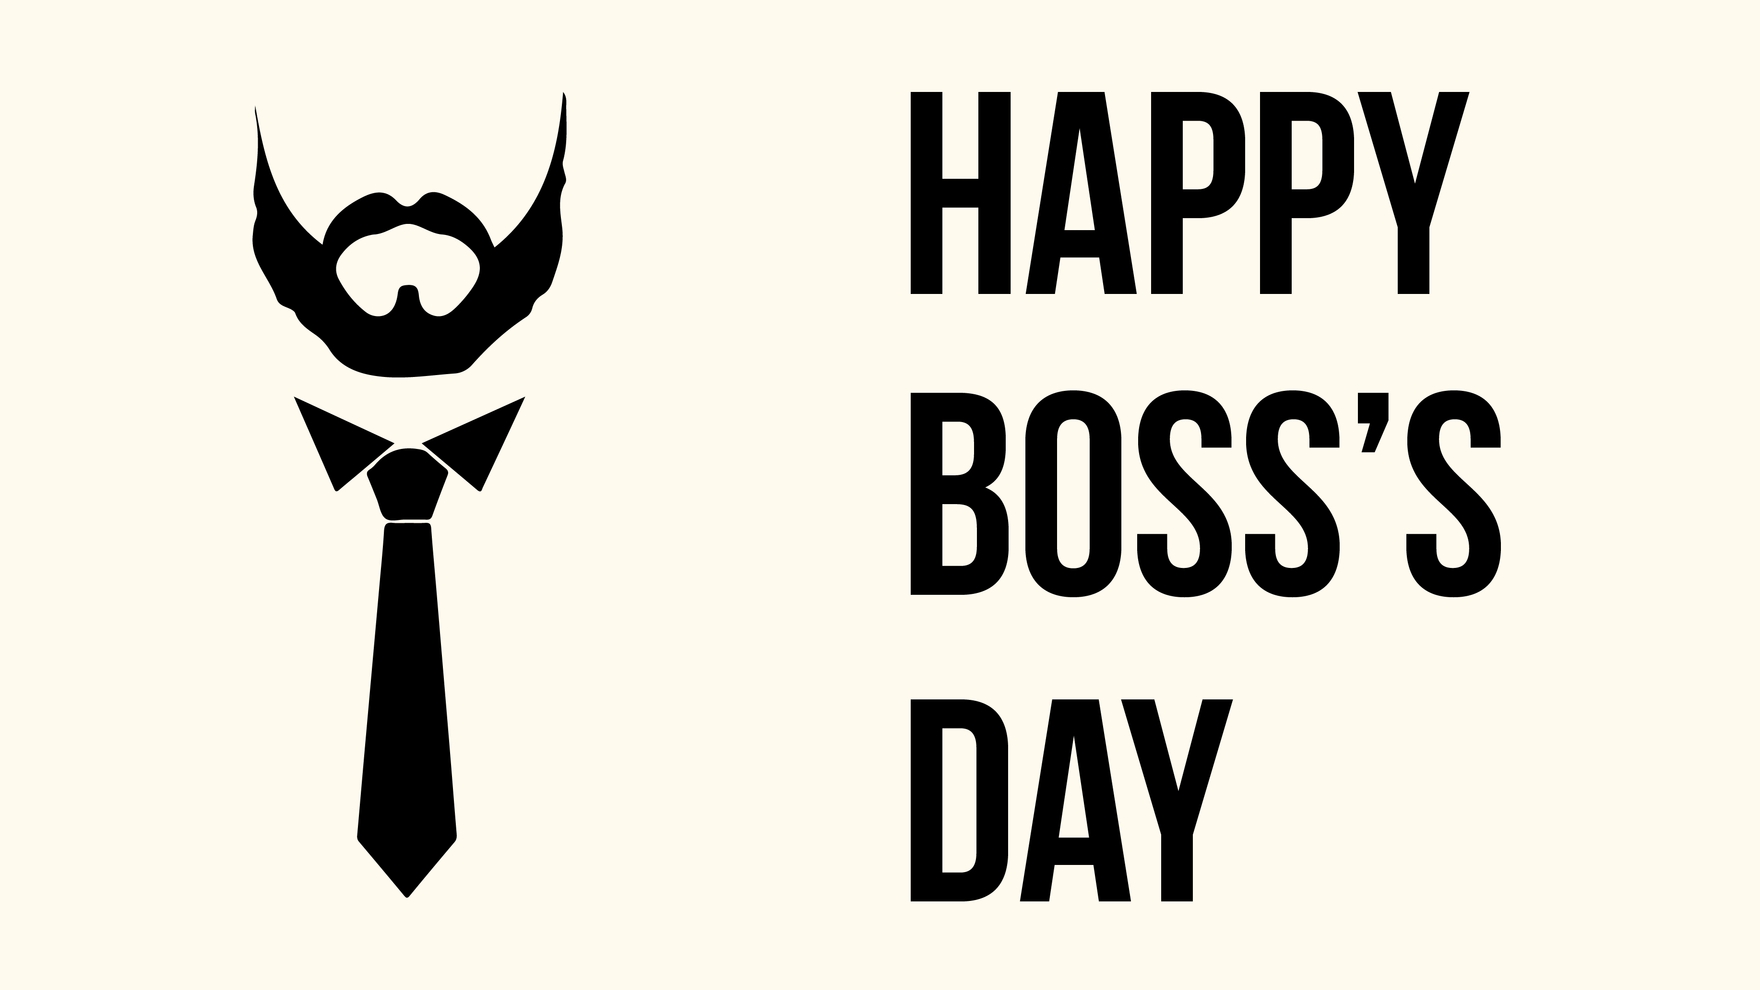 Boss' Day Banner Background